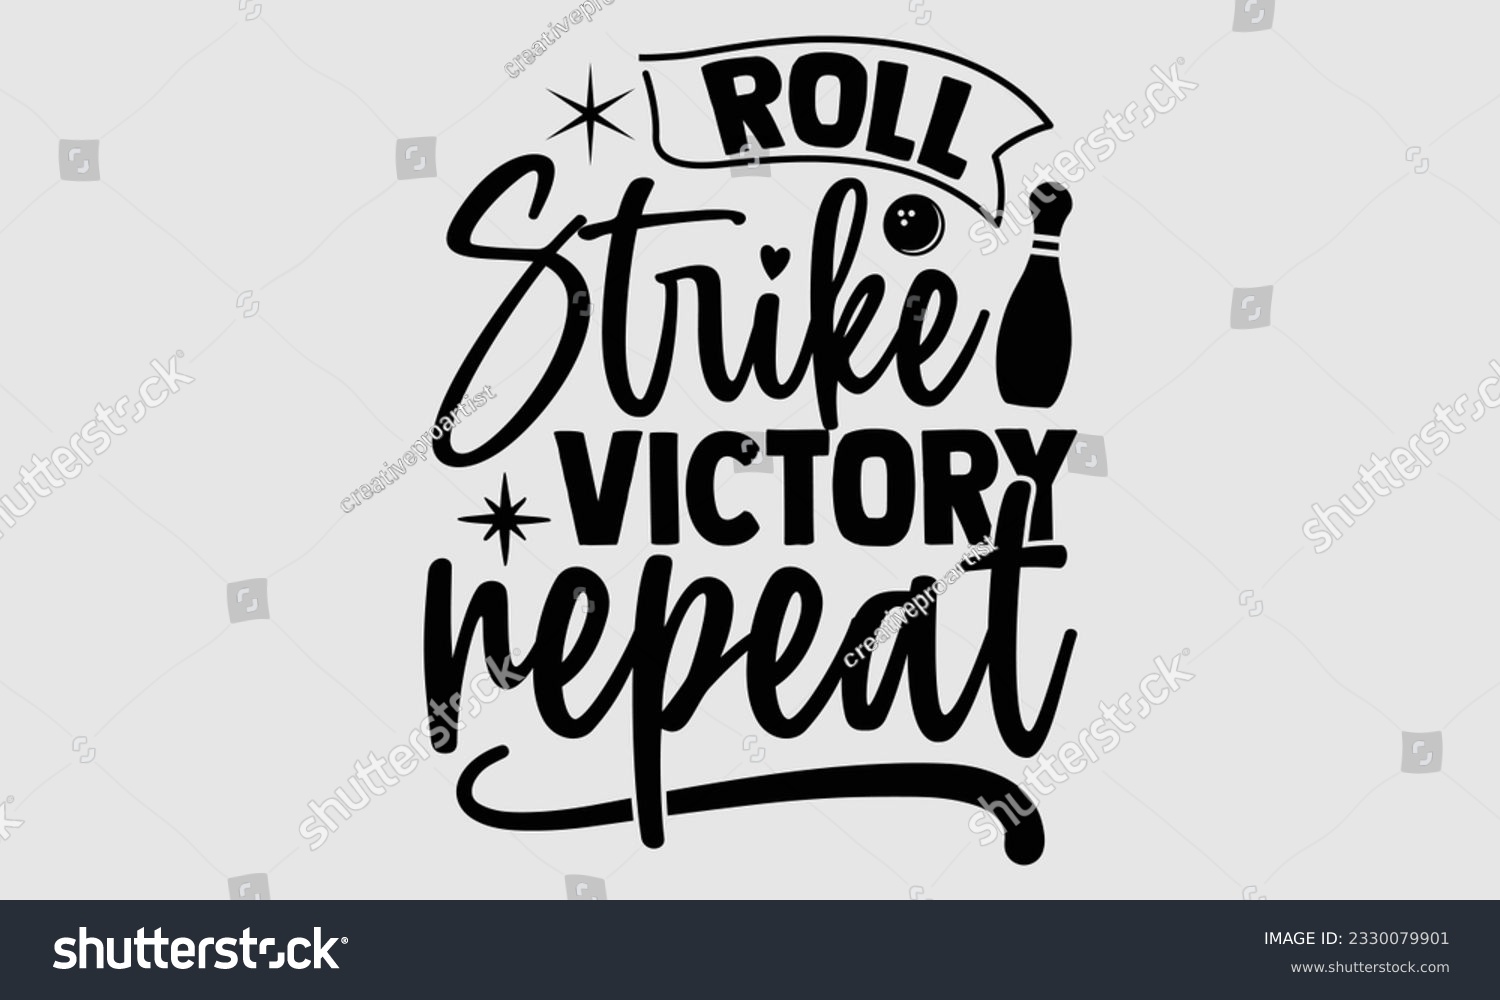 SVG of Roll Strike Victory Repeat- Bowling t-shirt design, Handmade calligraphy vector Illustration for prints on SVG and bags, posters, greeting card template EPS svg